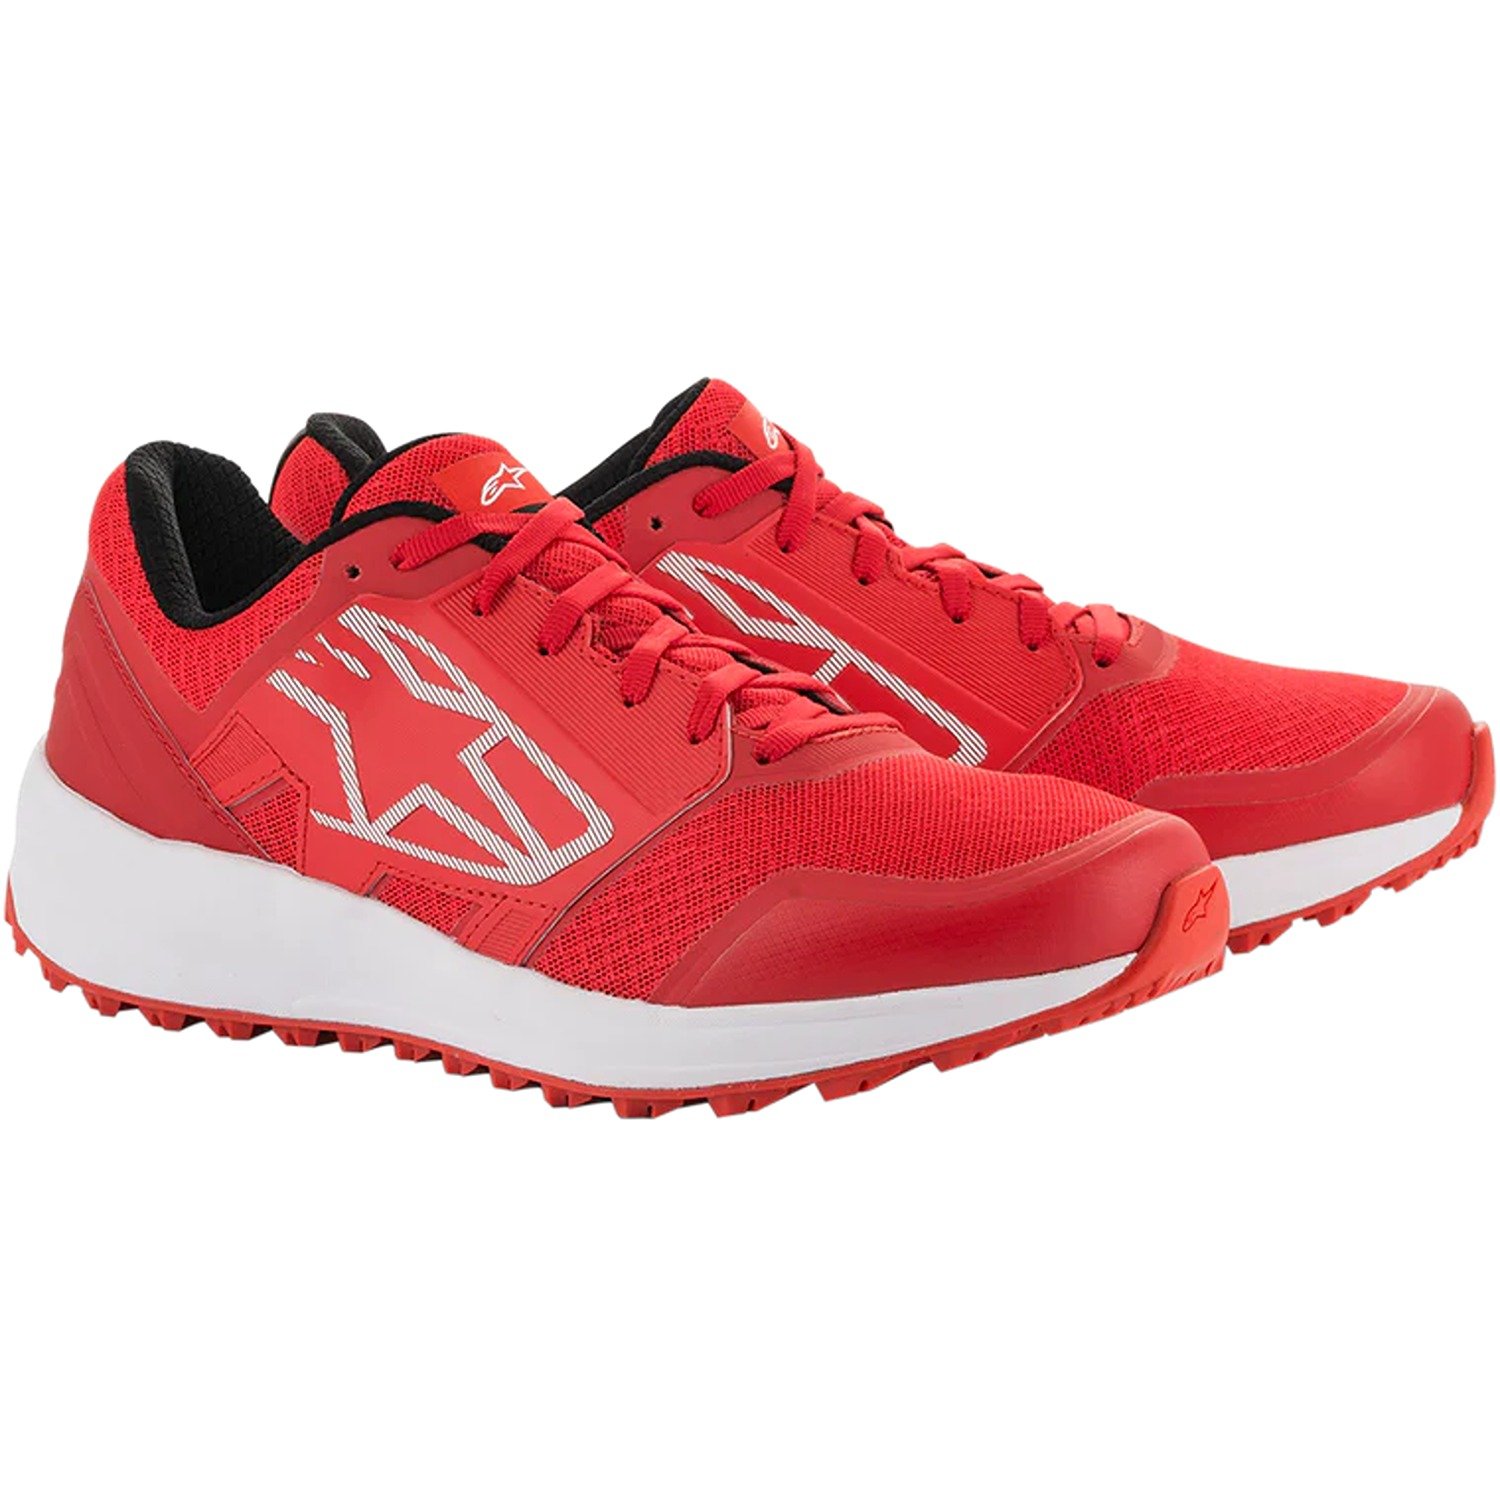 Image of EU Alpinestars Meta Trail Shoes Red White Taille US 75